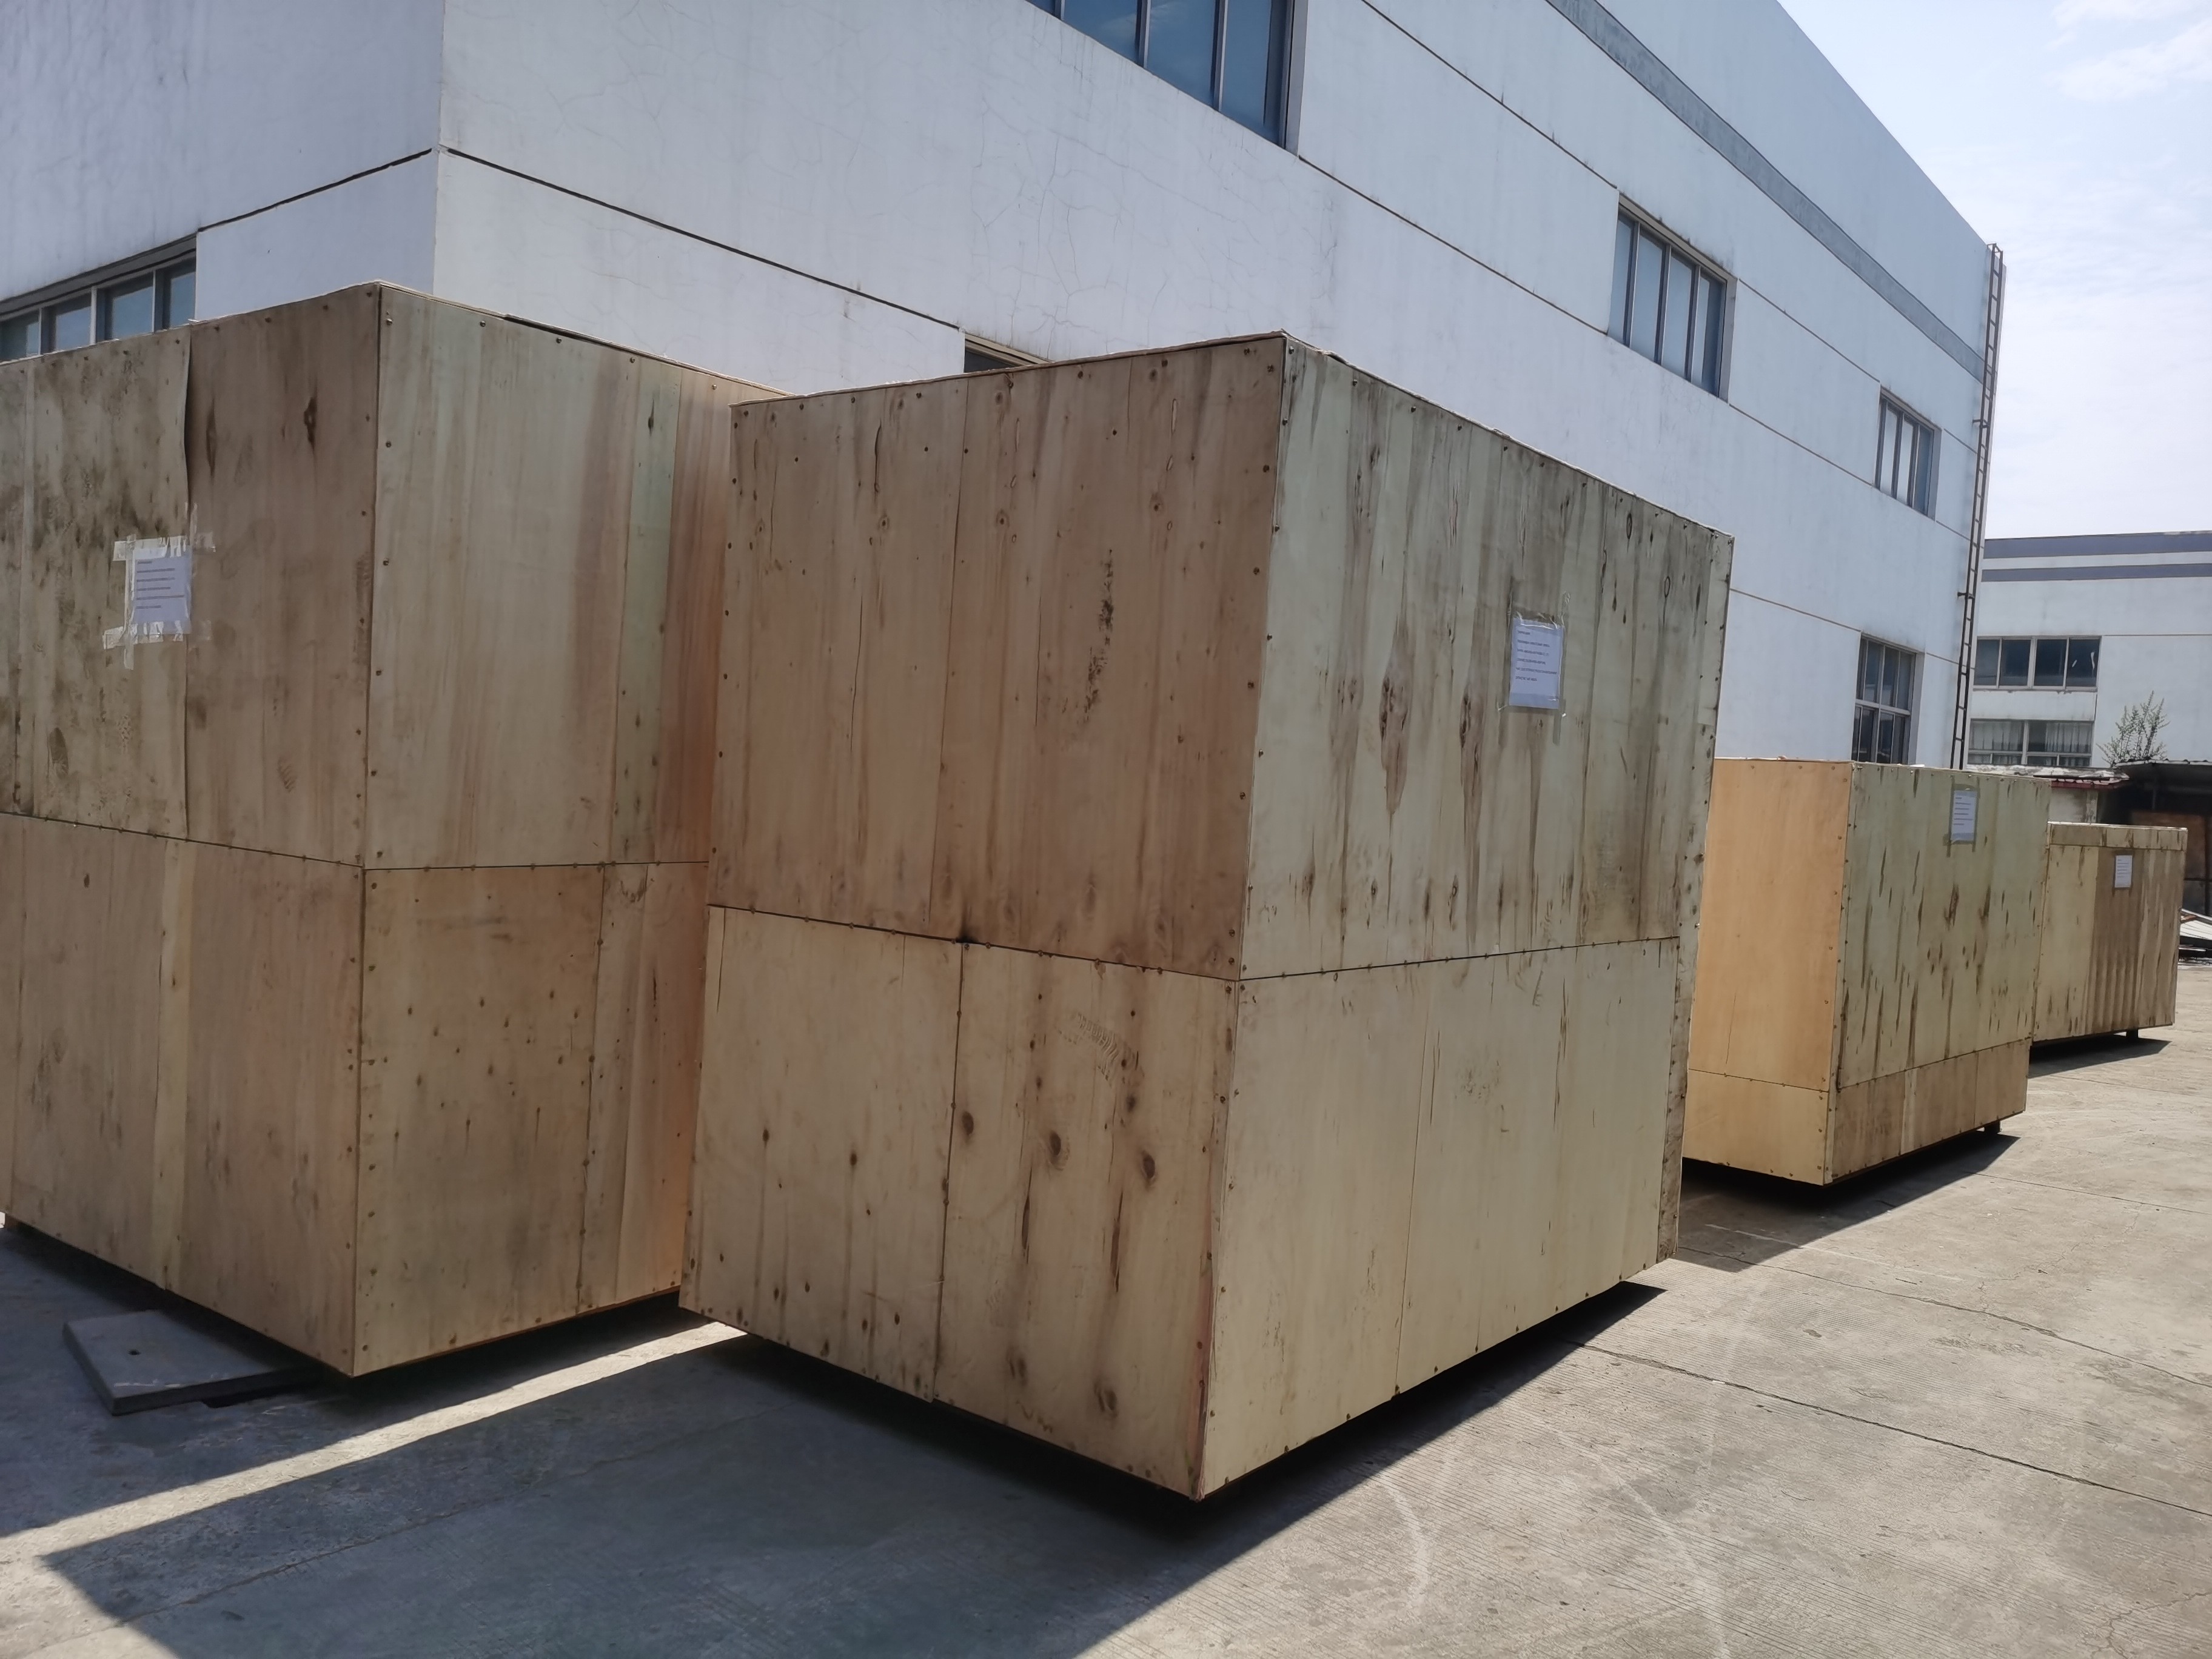 Latest company case about 1 container of machinery shipped to Indonesia